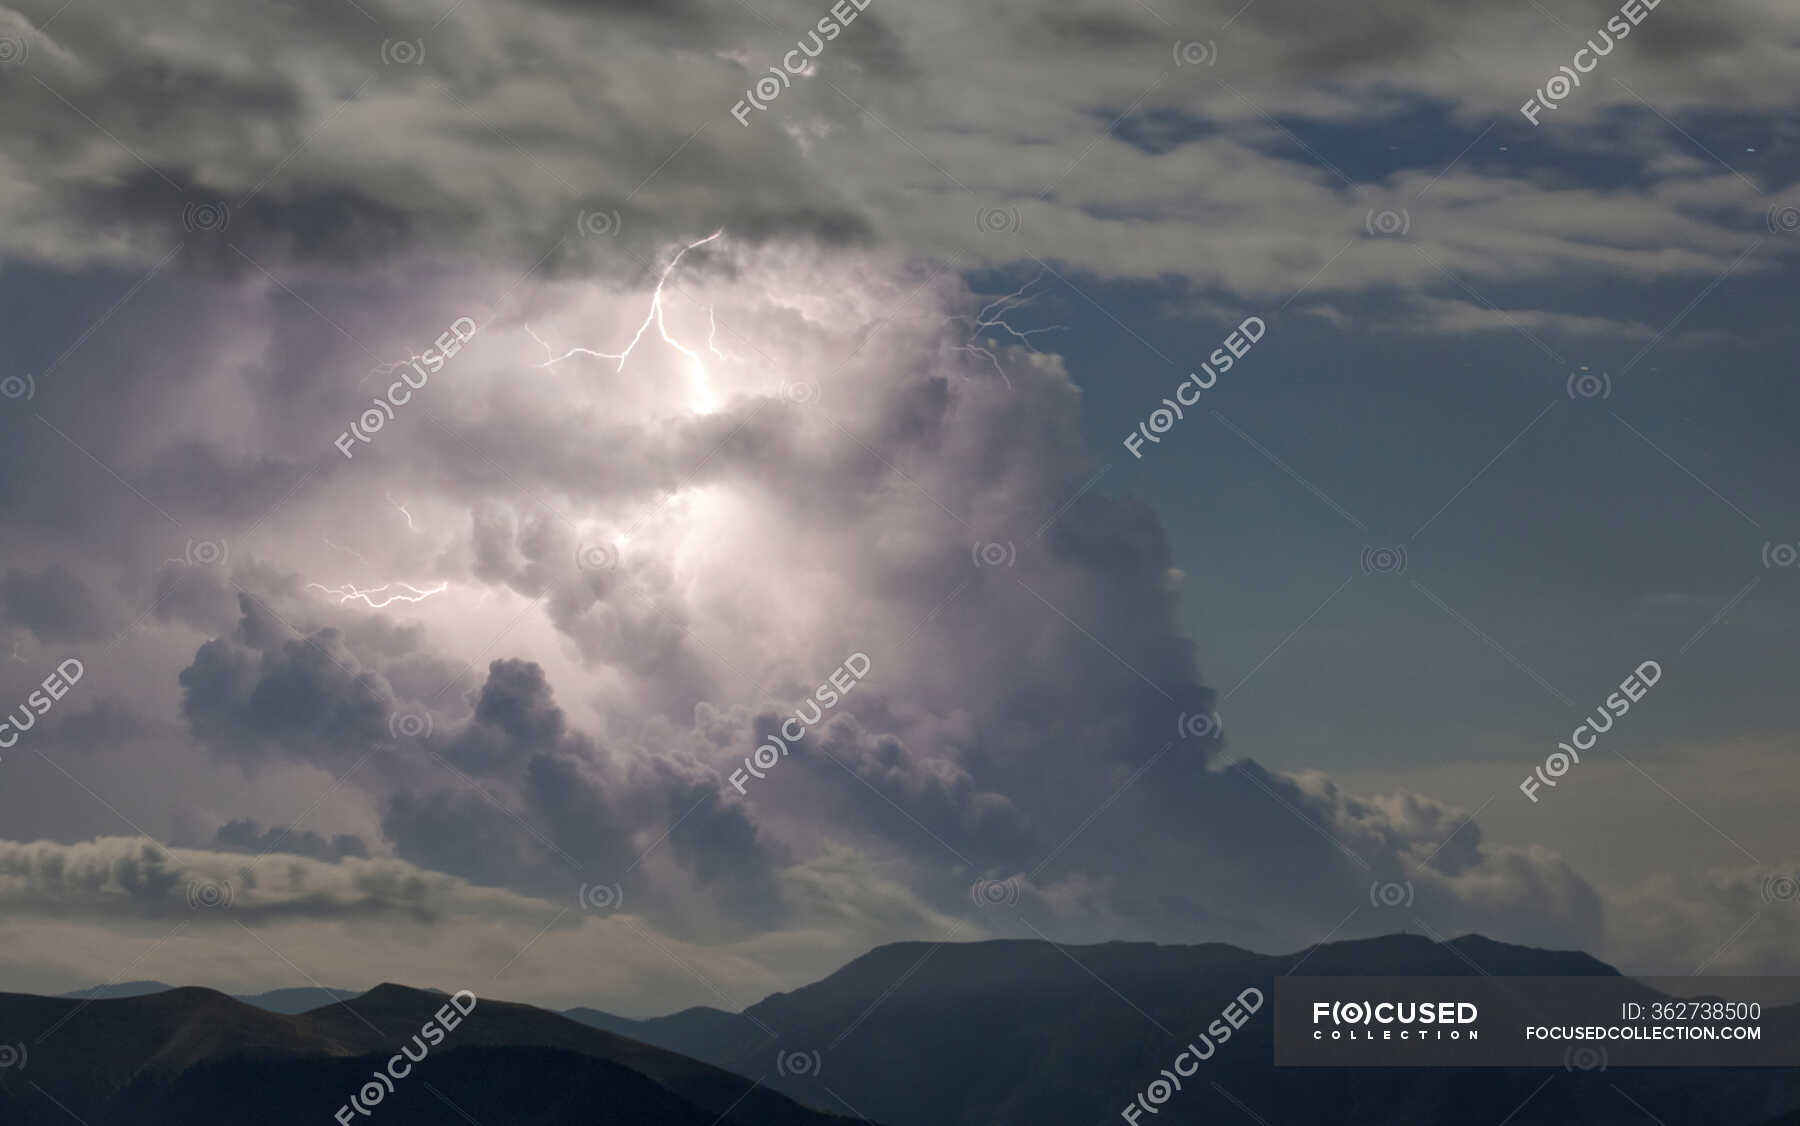 Thunder clouds with lightning on blue sky over dark rocky mountain range —  overcast, magnificent - Stock Photo | #362738500